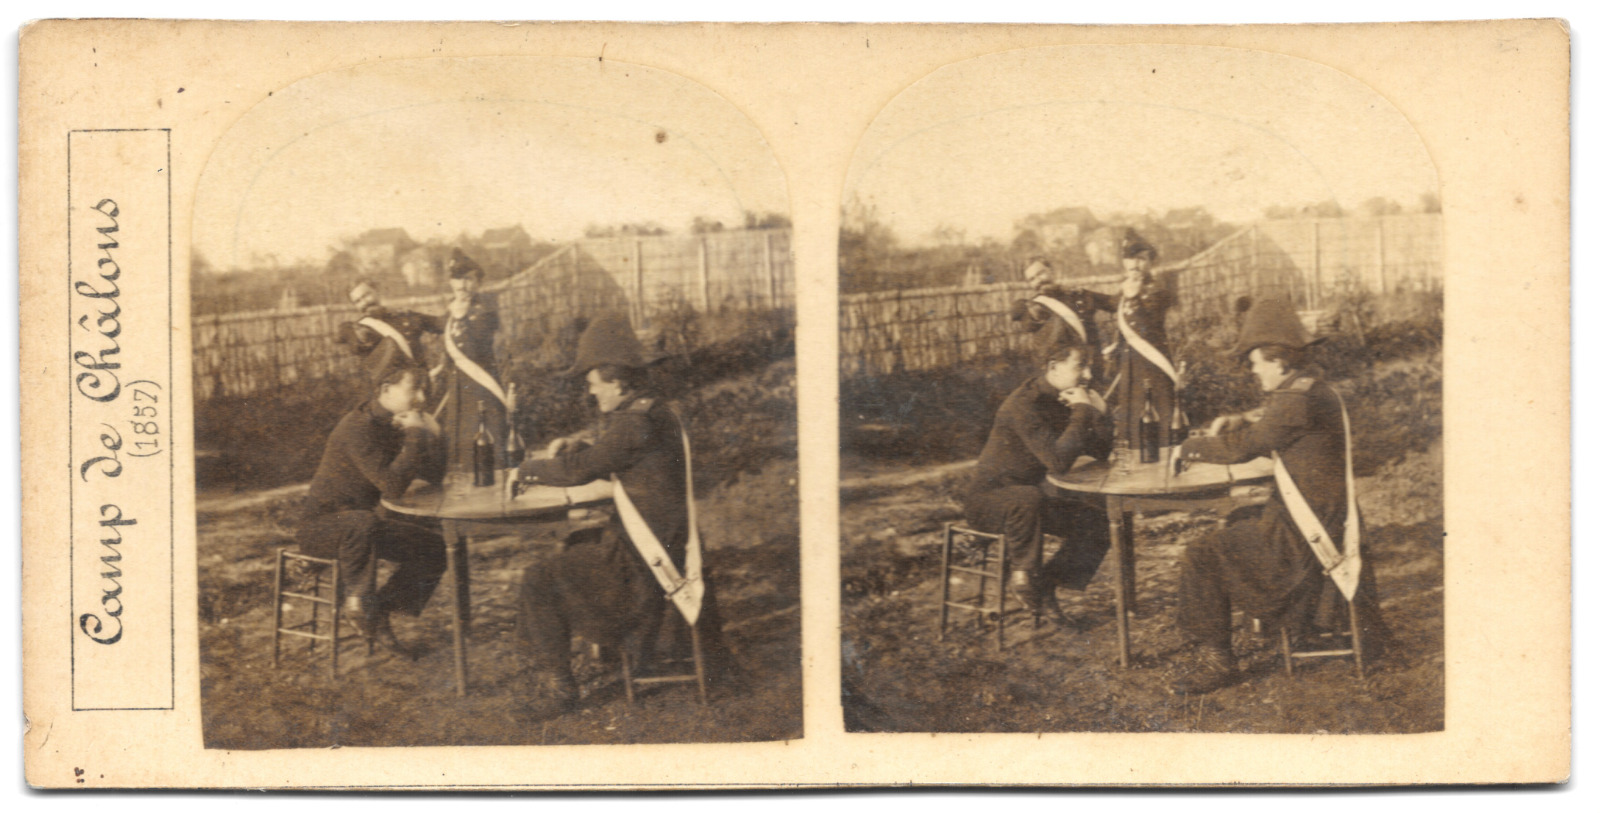 1857 Gustave le Gray Stereo Camps de Châlons Photo Military Officers Drinking